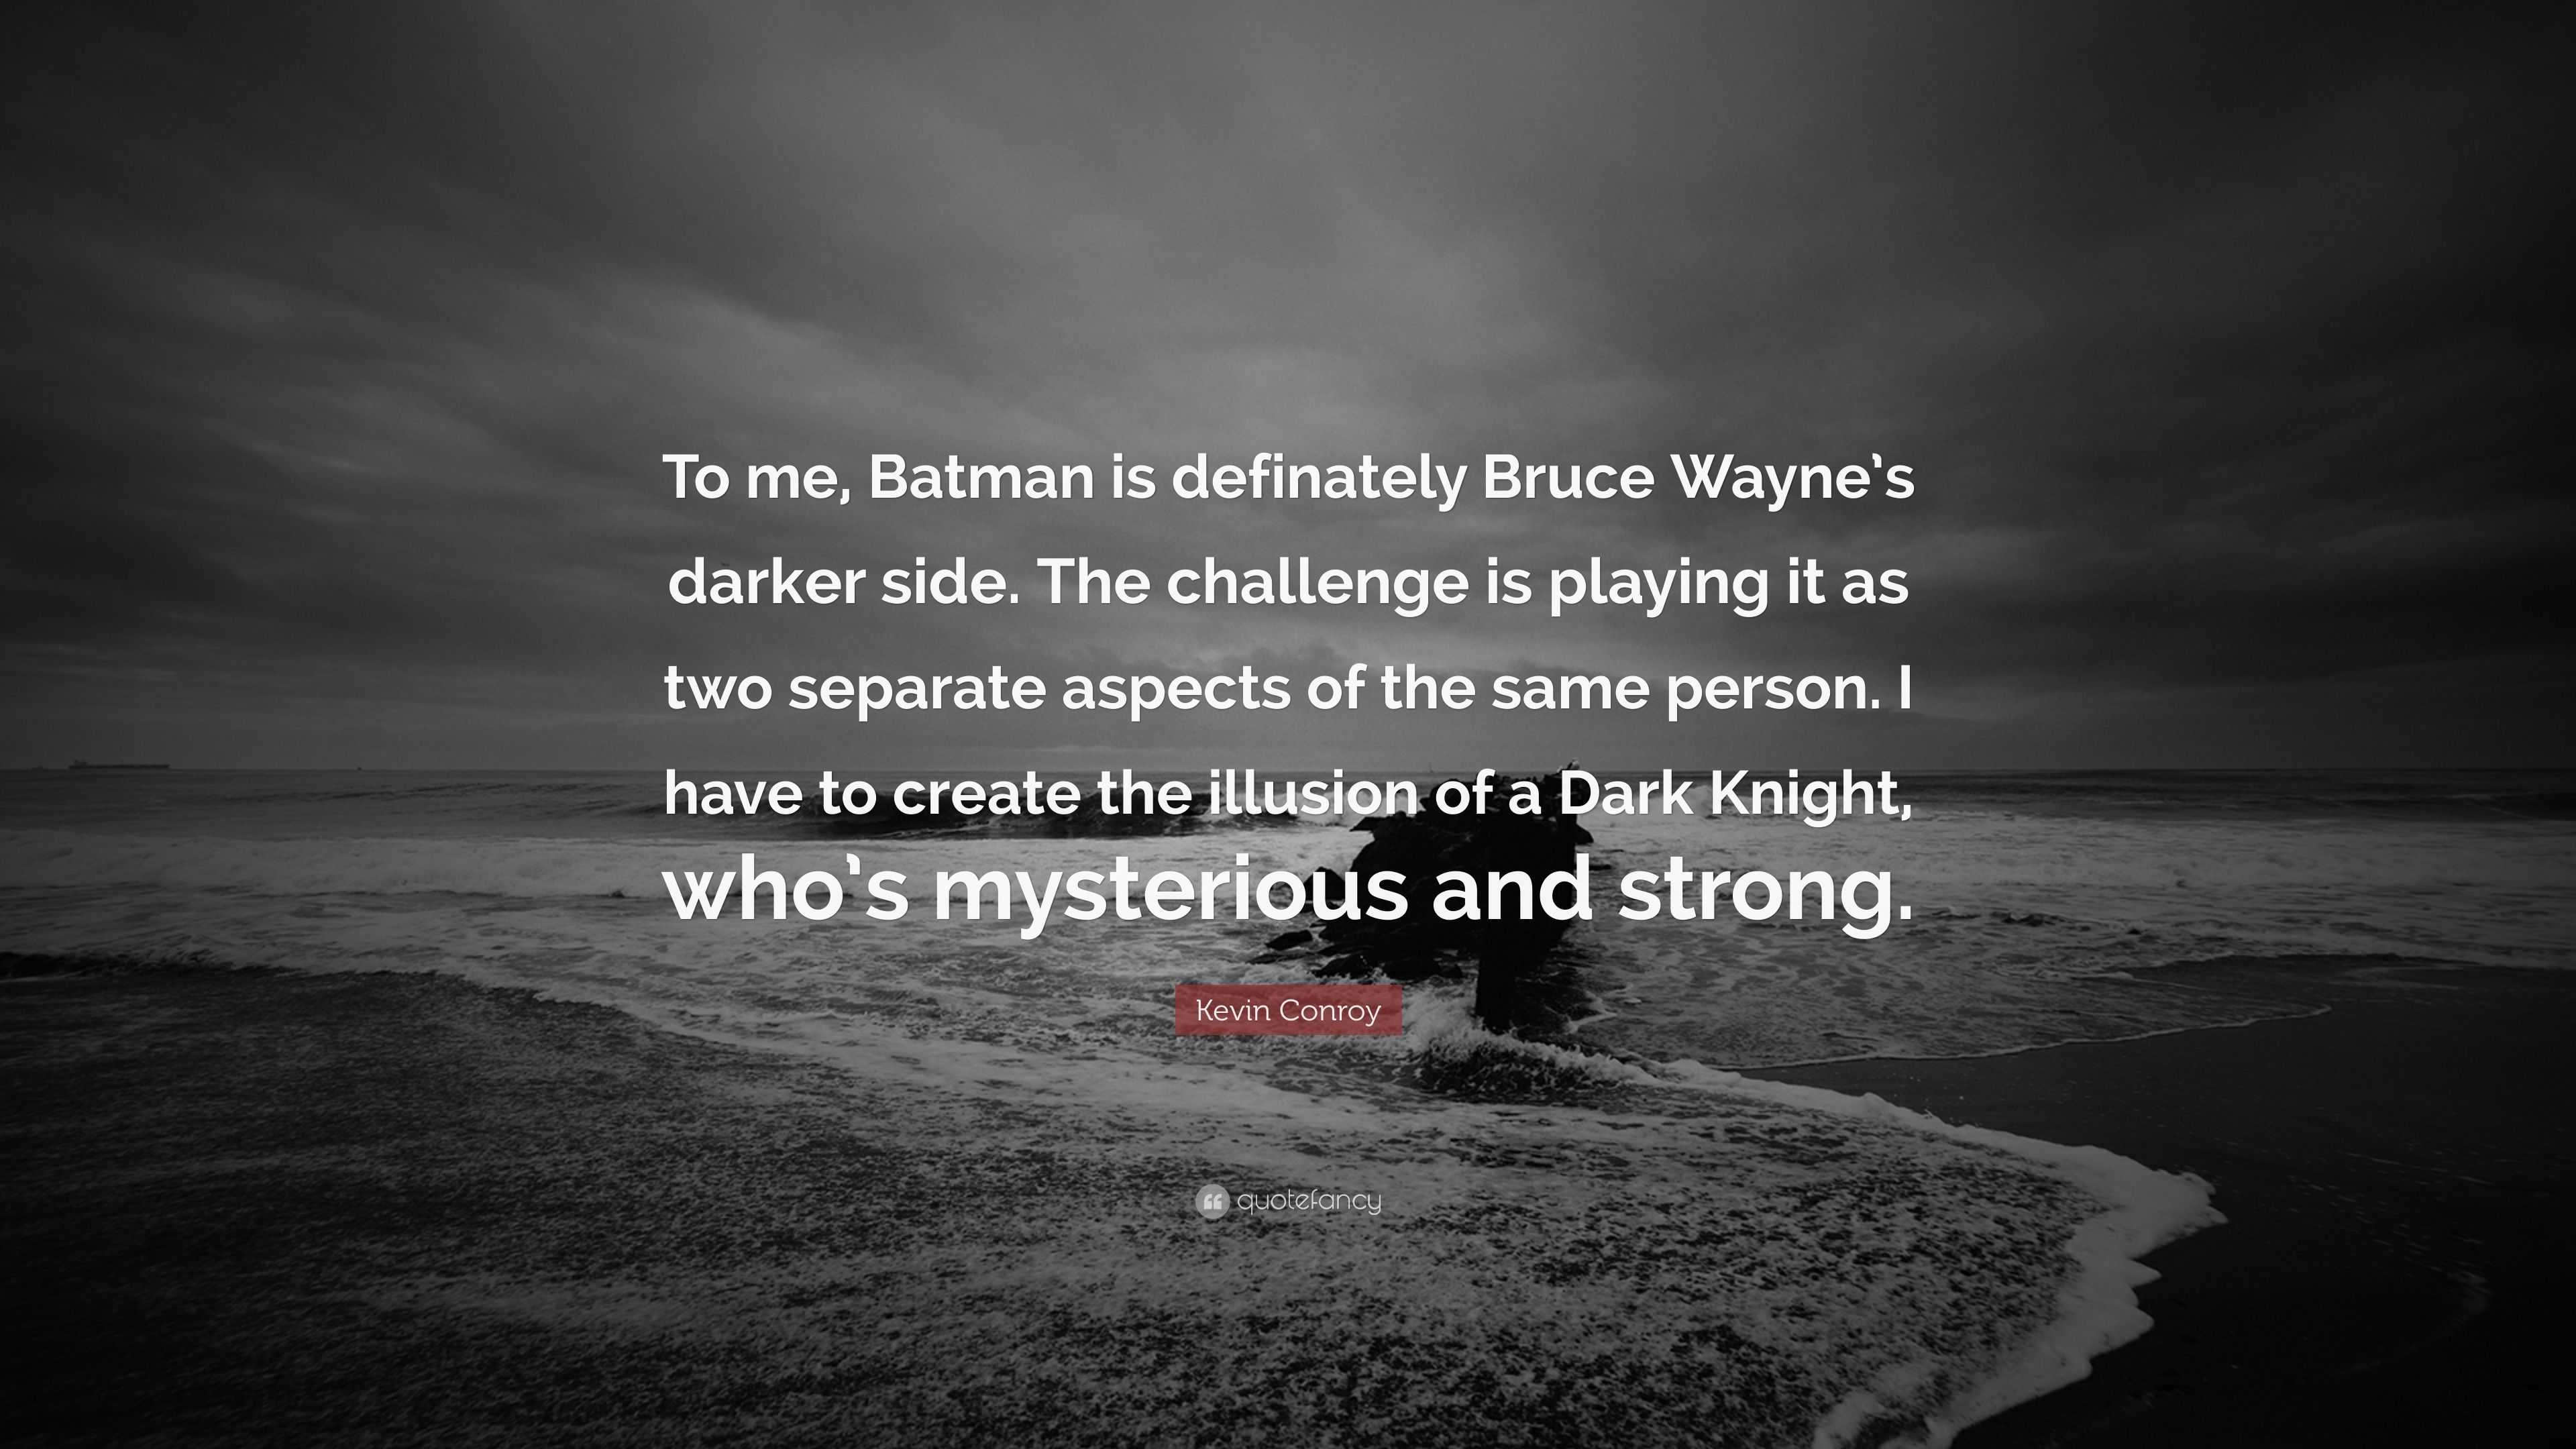 Kevin Conroy Quotes - BrainyQuote